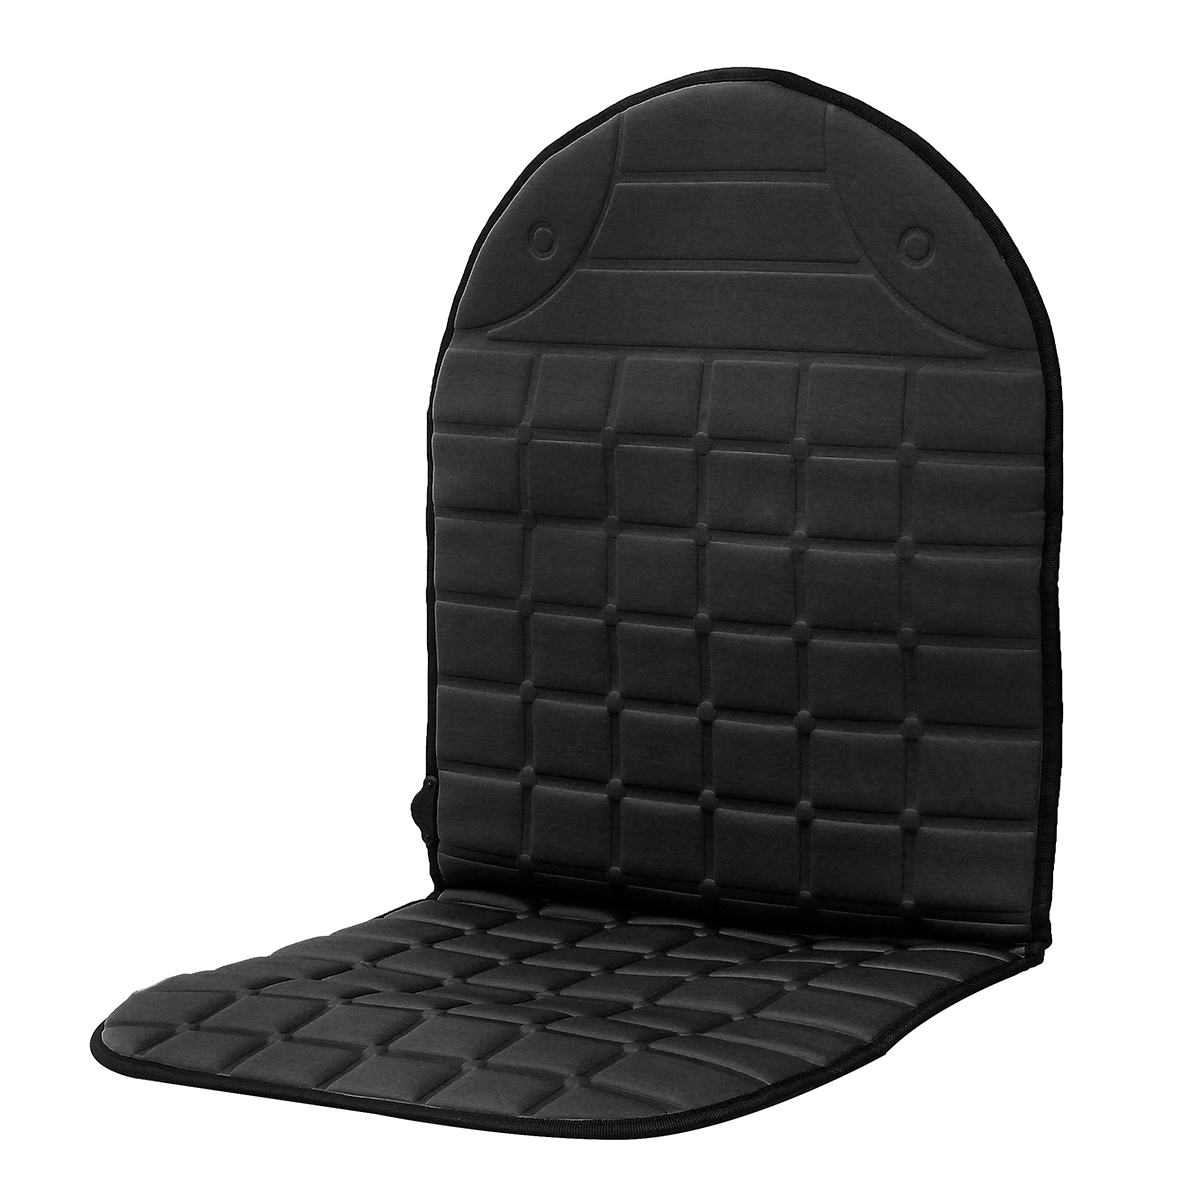 DC 12V Car Electric Heating Seat Cushion Car Seat Cover Heater Winter Home/Car - Auto GoShop